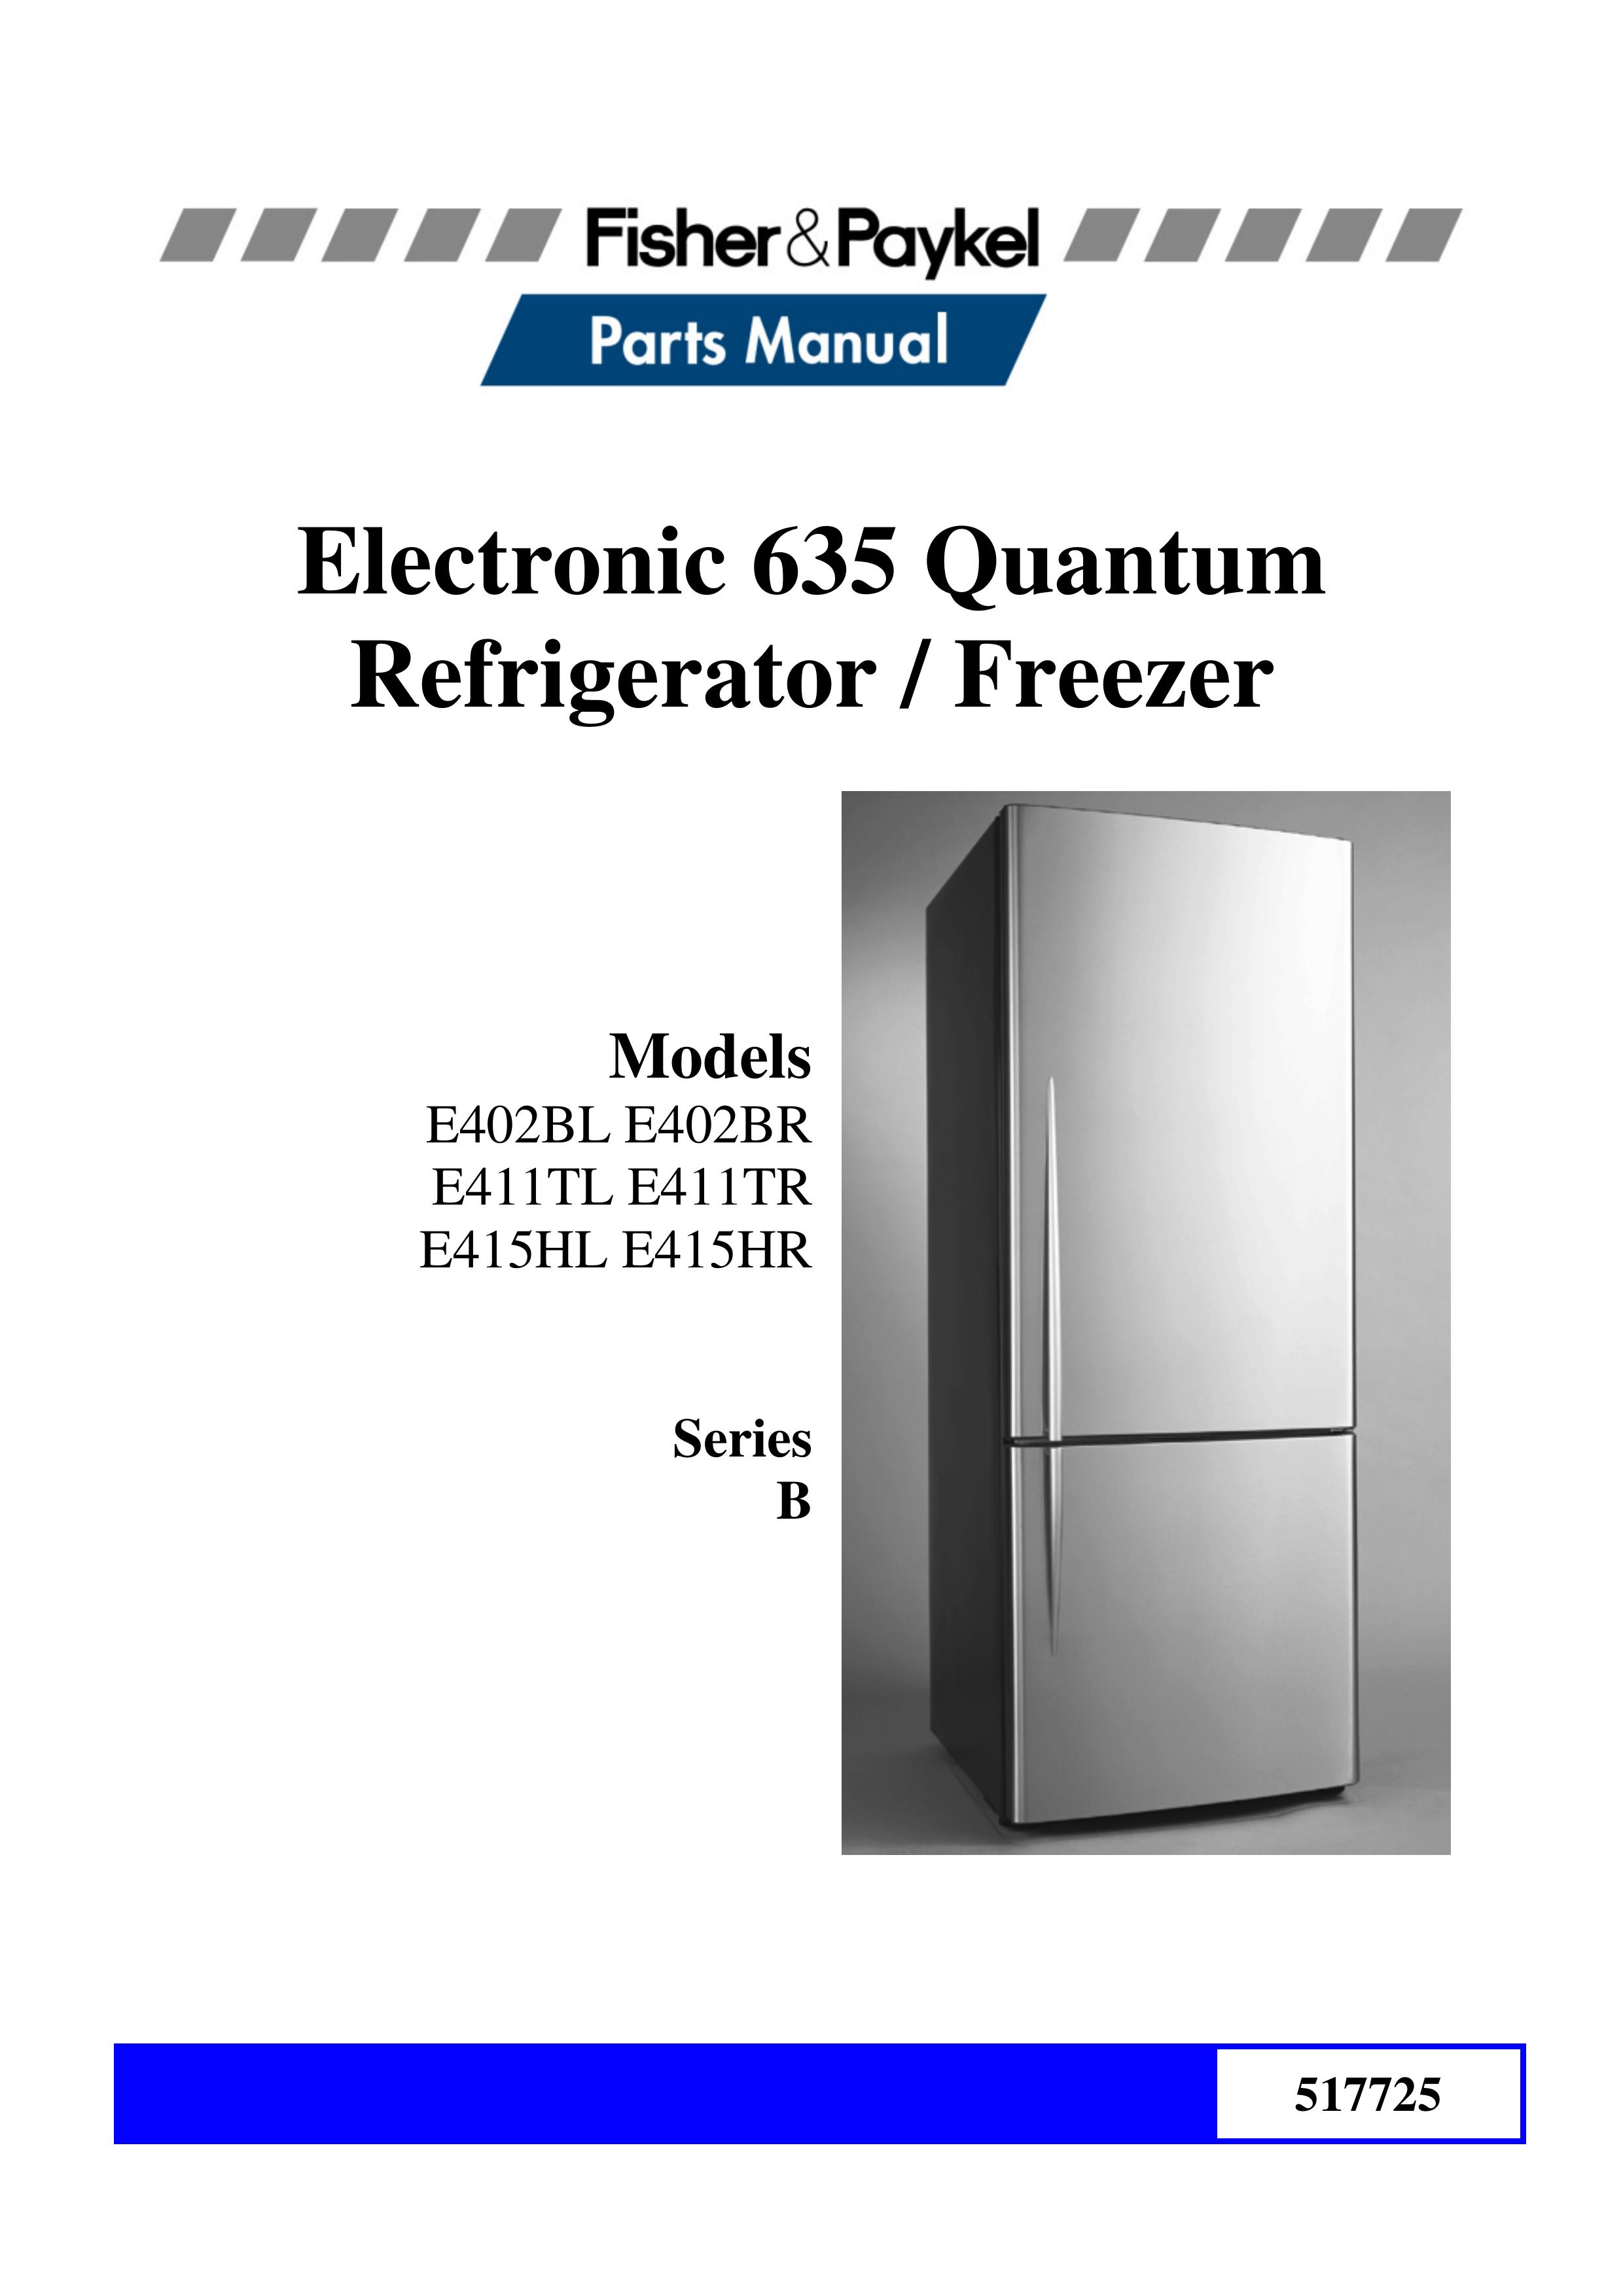 Fisher & Paykel E411TR Refrigerator User Manual